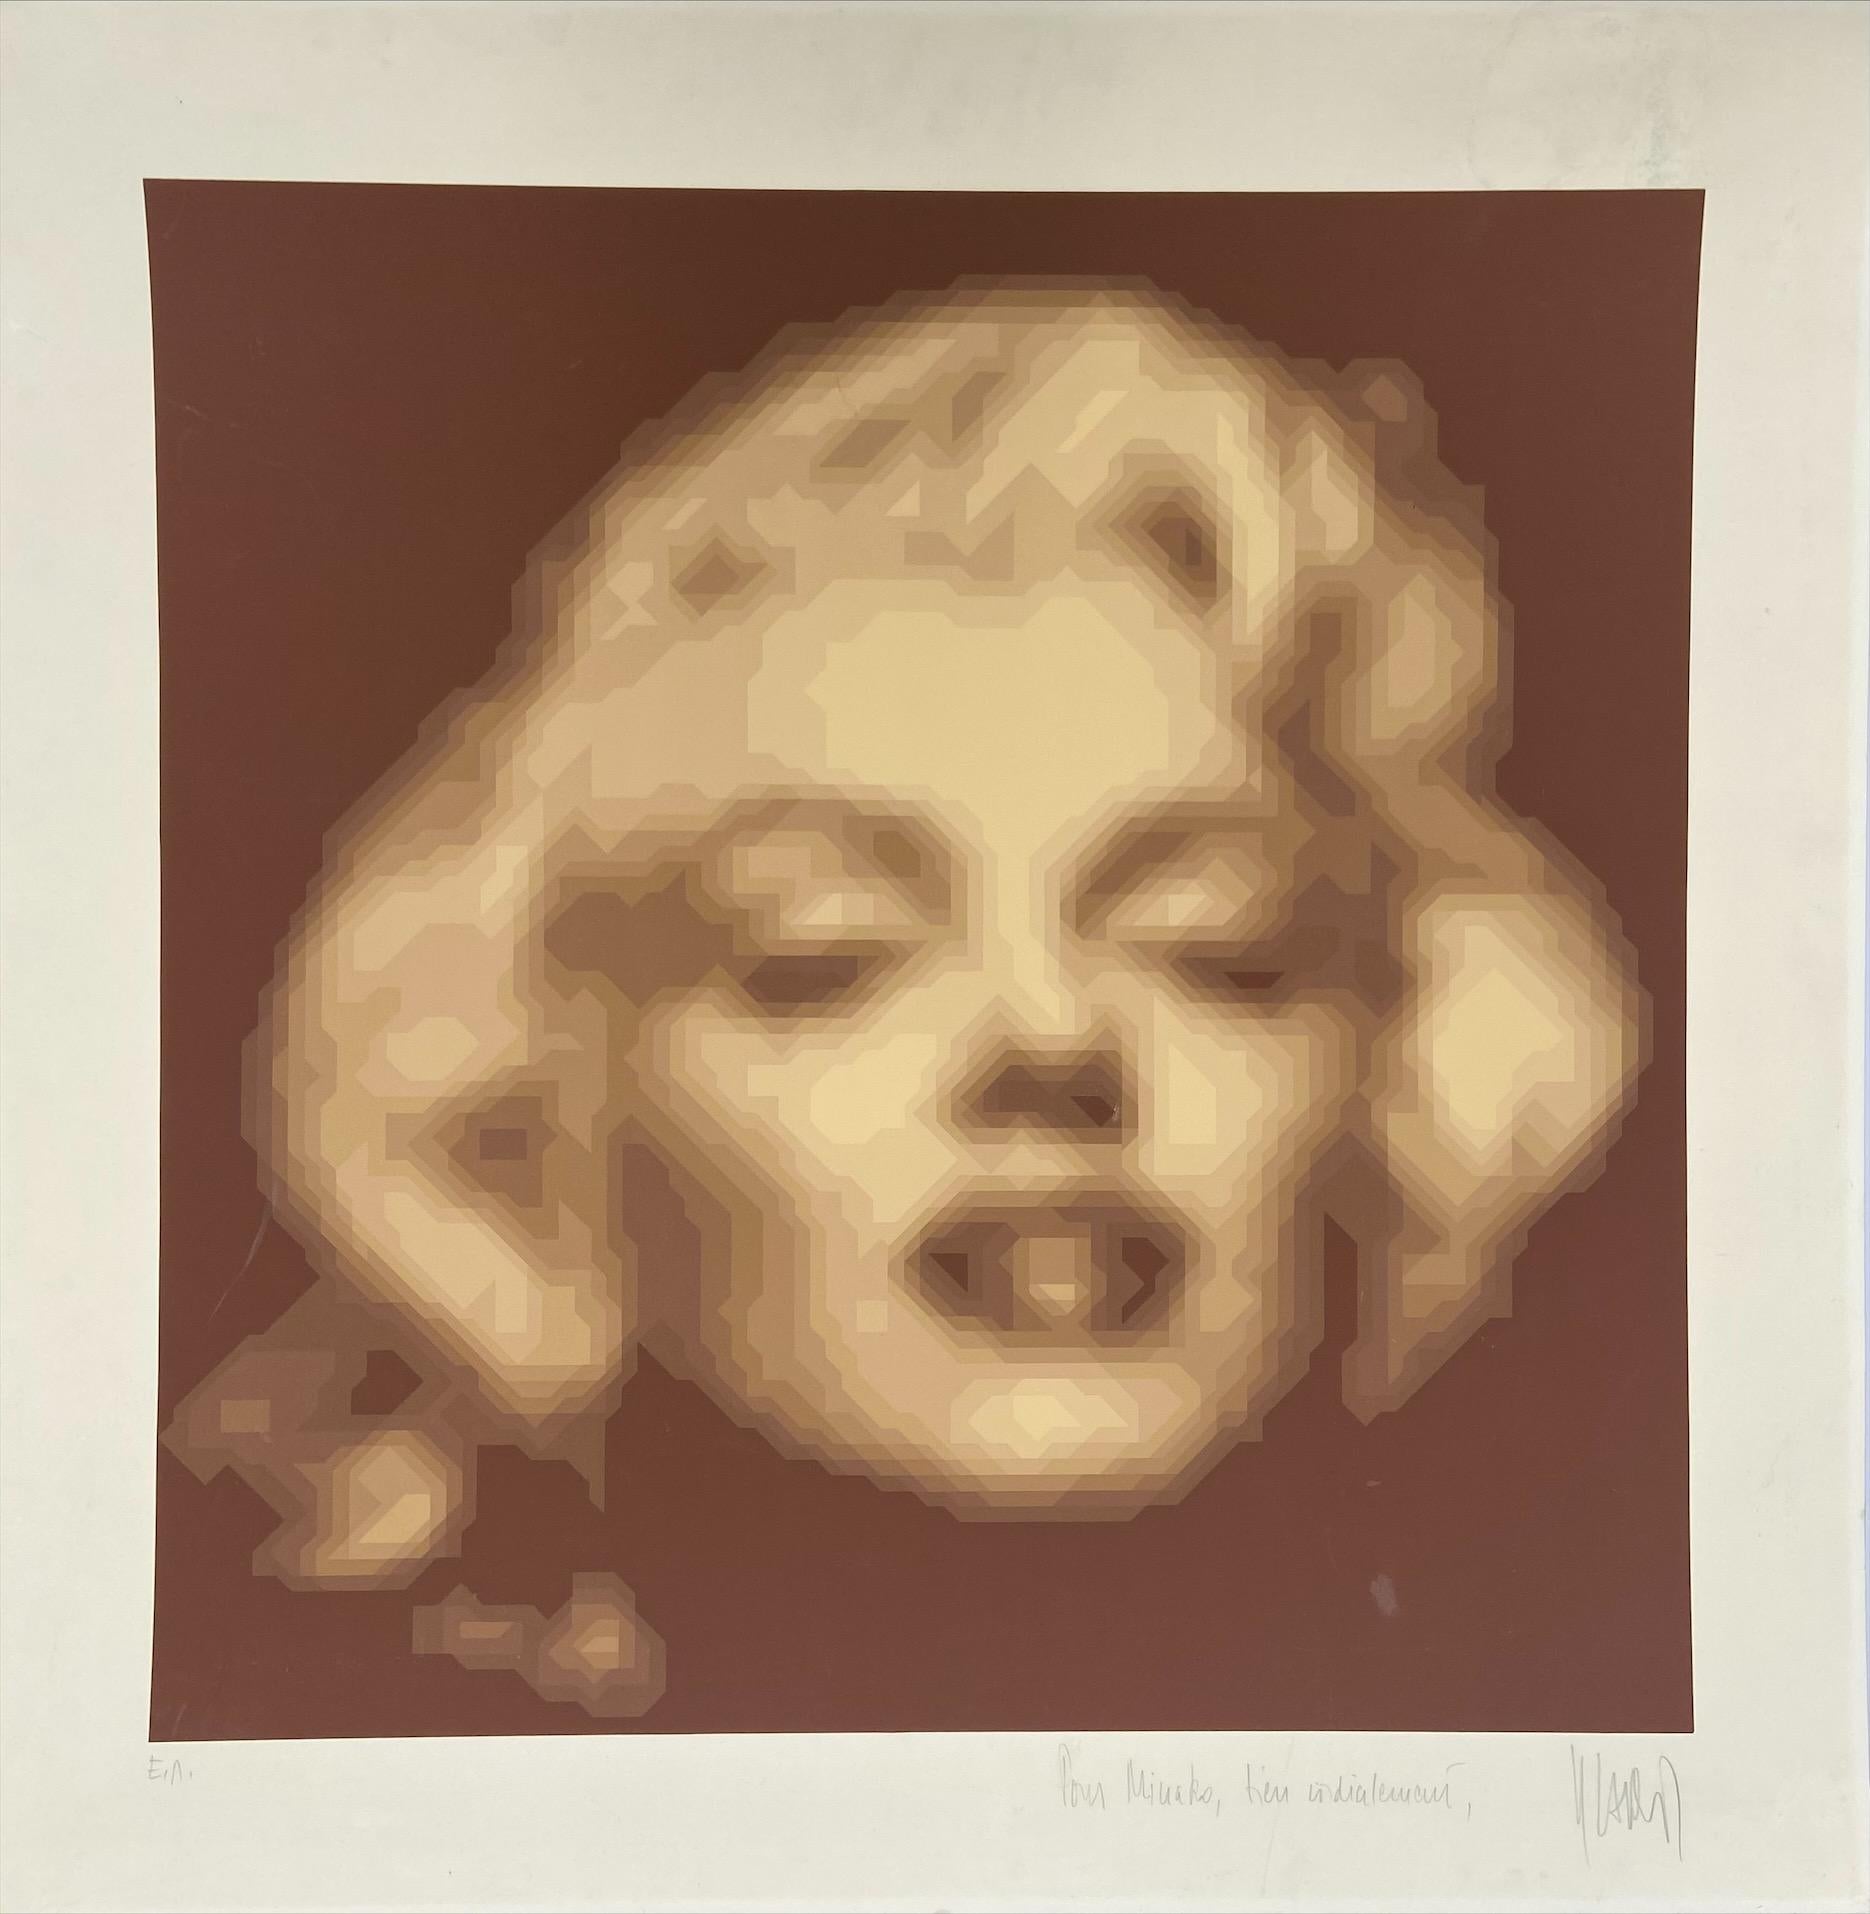 Yvaral (Jean-Pierre Vasarely) - Marilyn Monroe
screen printing
Signed and dedicated
Annotated artist's proof
Circa 1970
75x75cm
